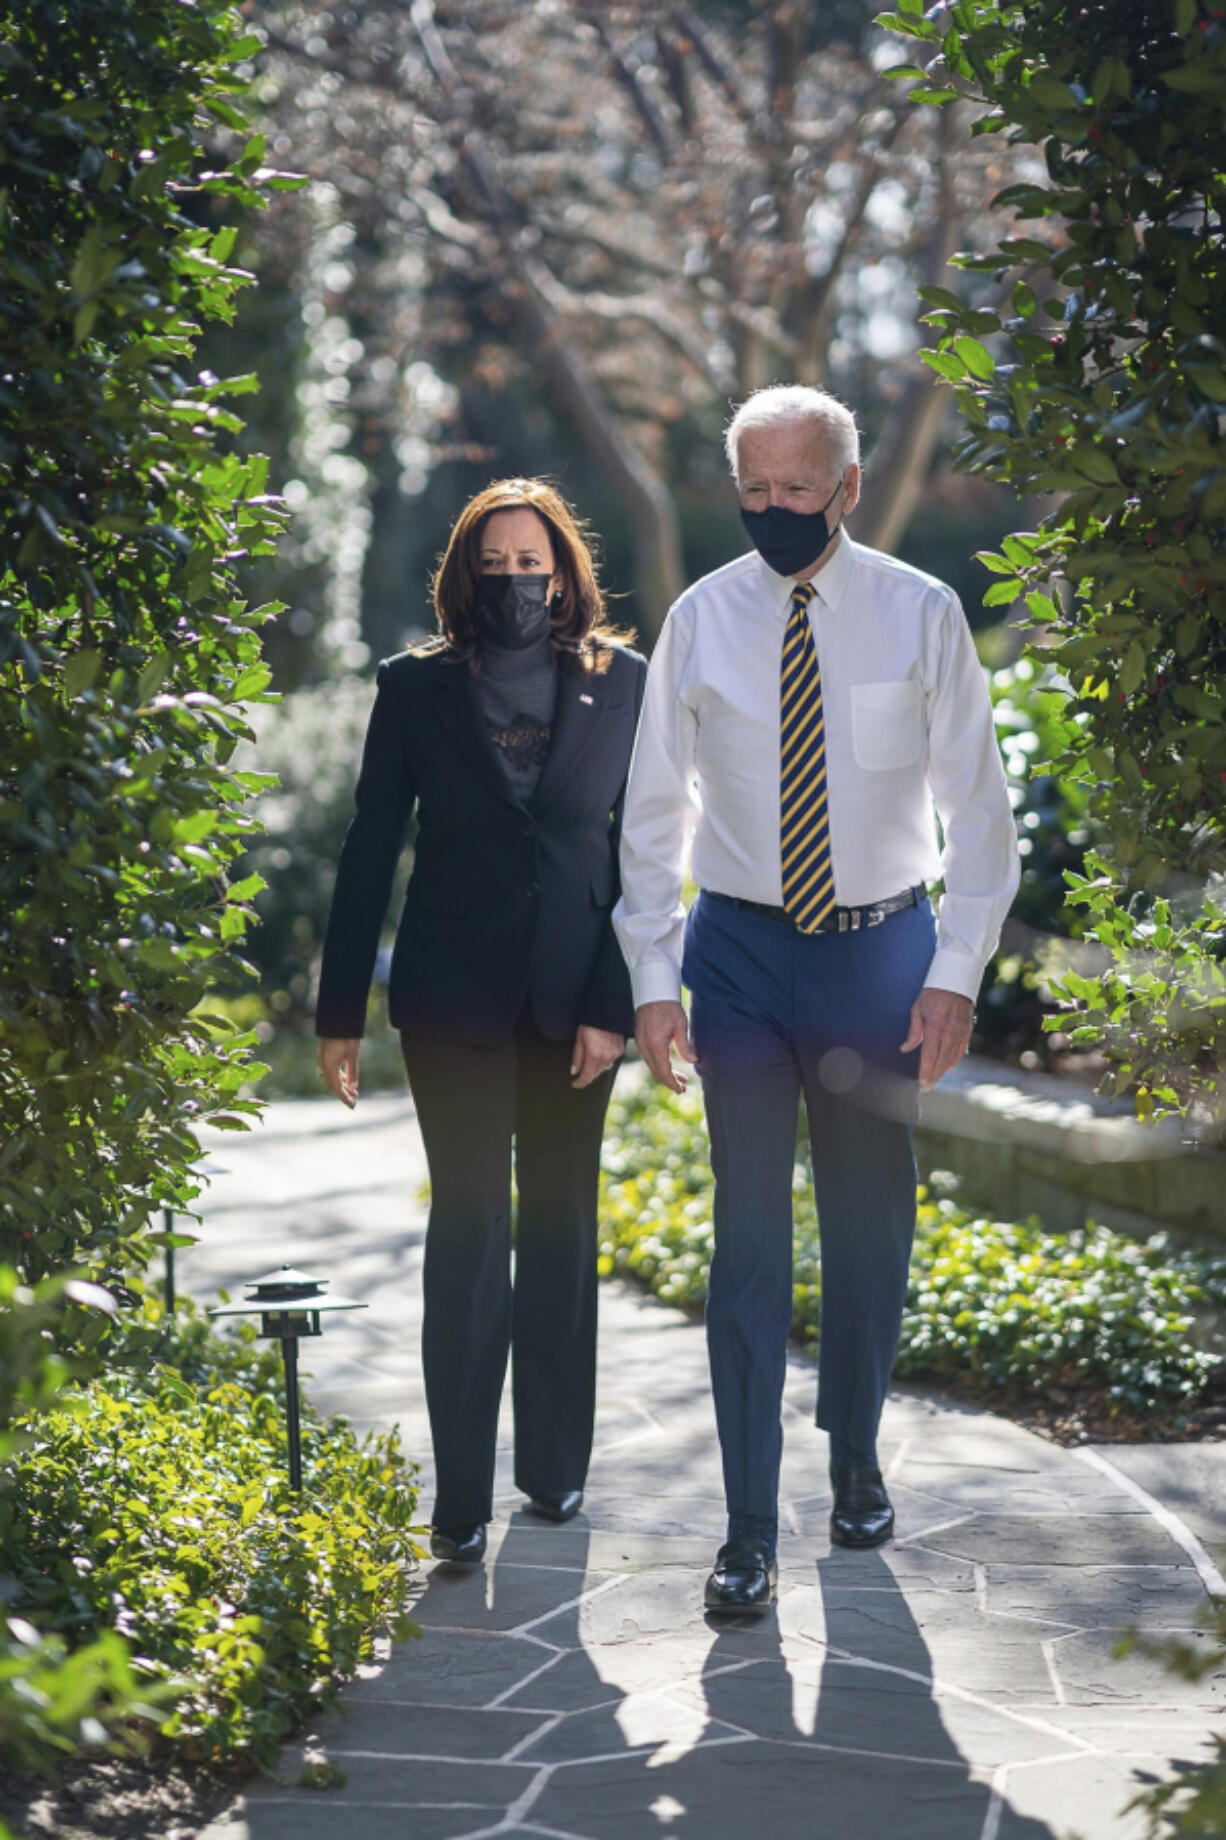 President Joe Biden walks with Vice President Kamala Harris through the grounds of the White House following their first weekly lunch Jan. 22, 2021, in Washington, D.C.